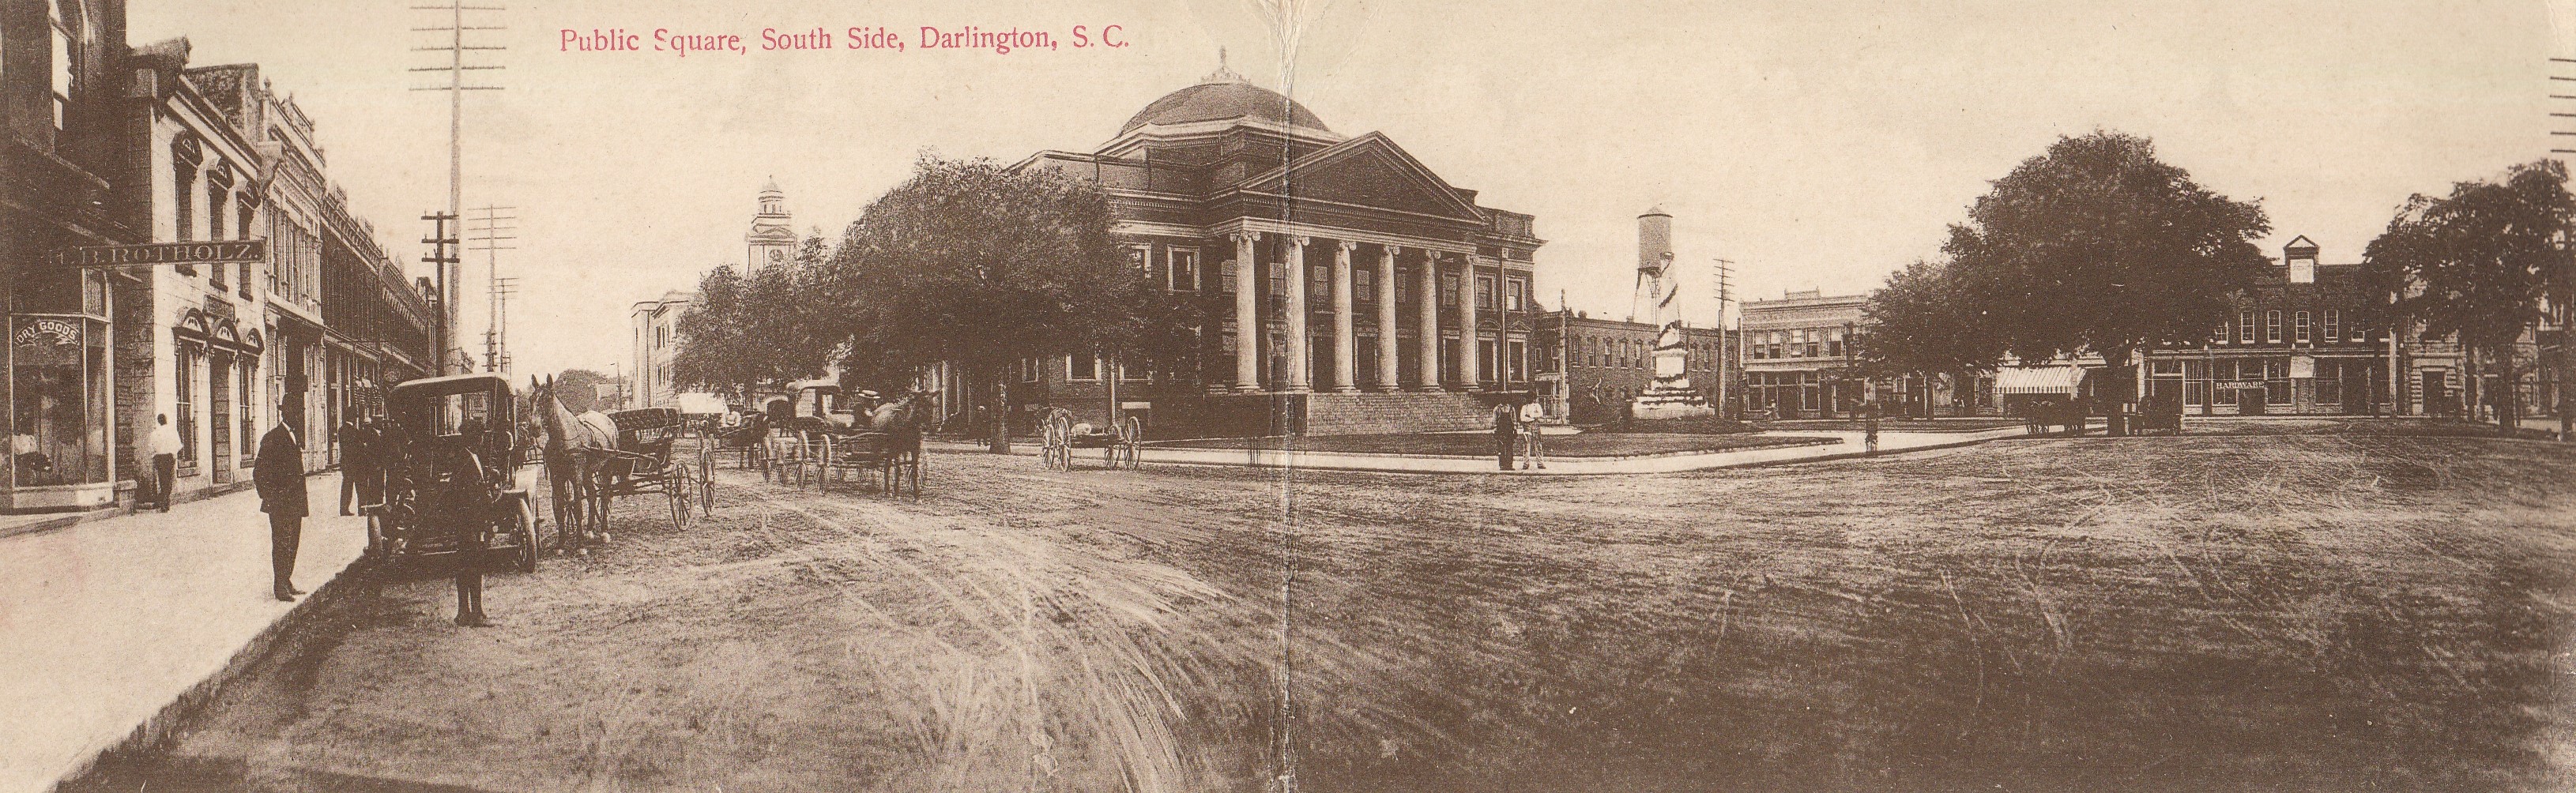 Darlington Courthouse - Black and White